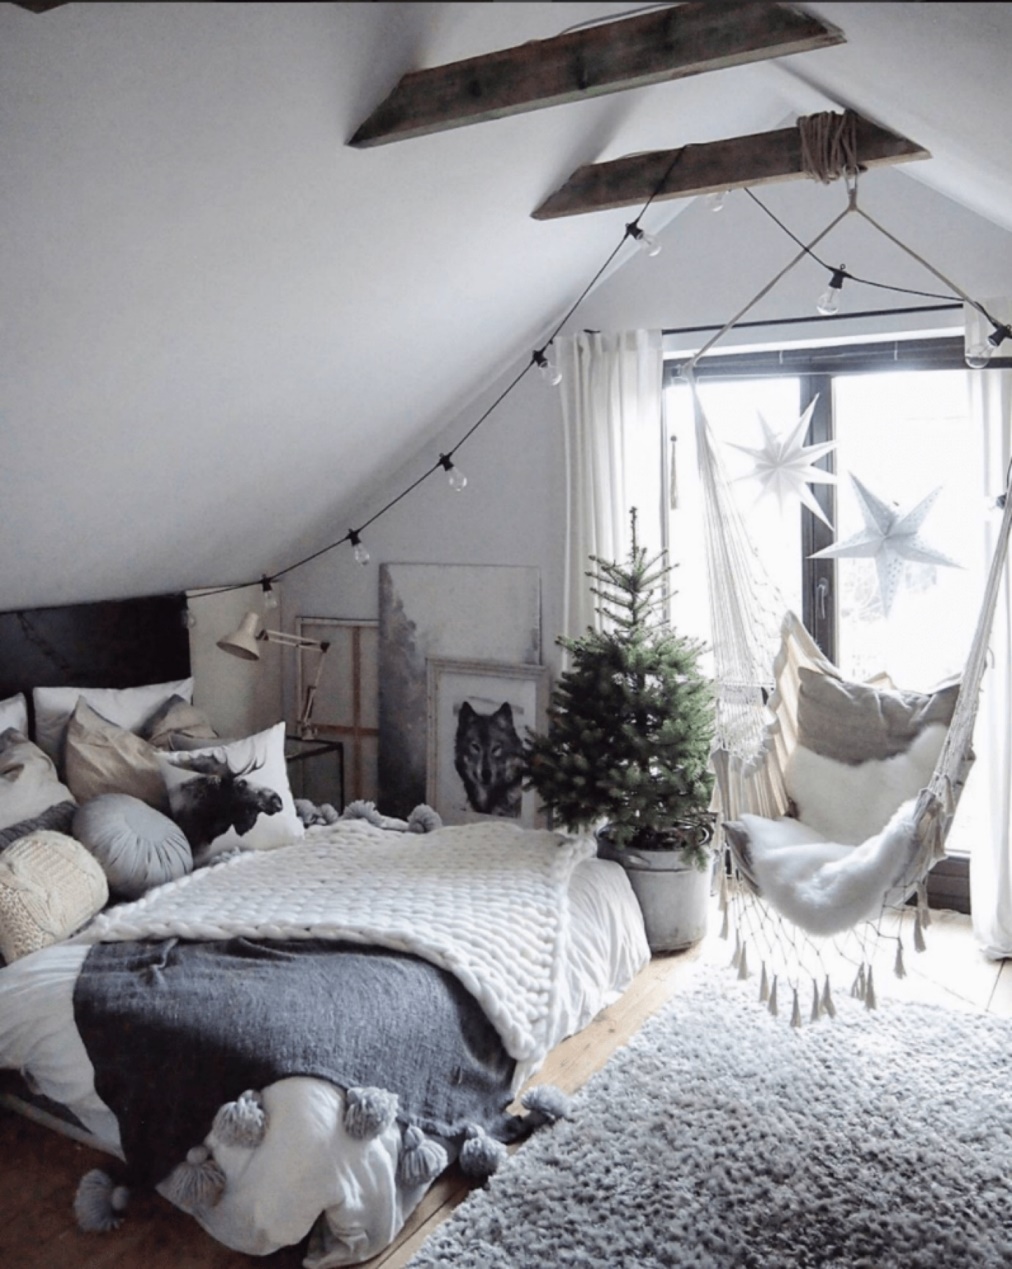 27+ Striking Aesthetic Bedroom Ideas to Inspire You